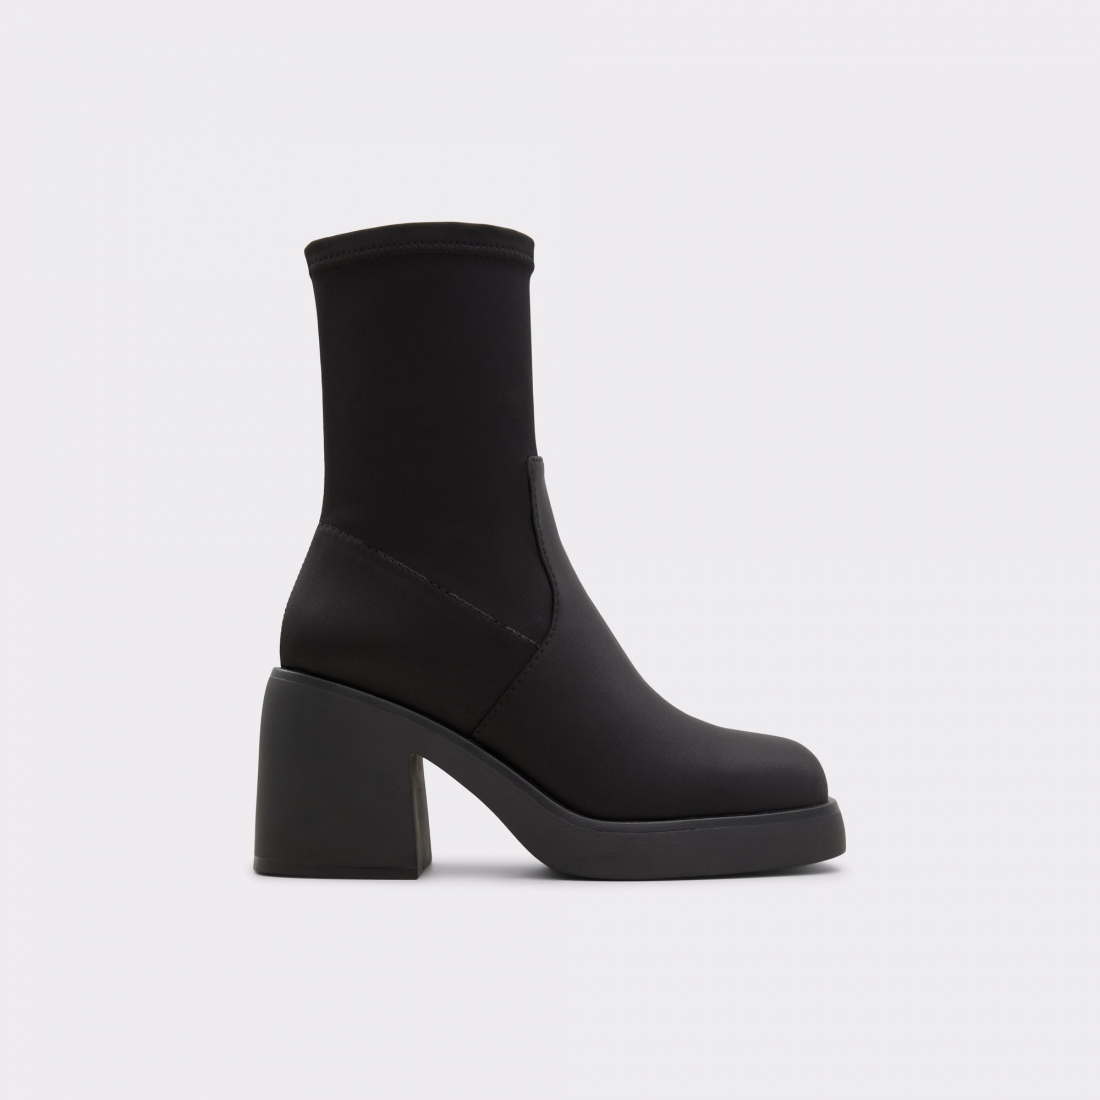 Women's 'Persona' Ankle Boots